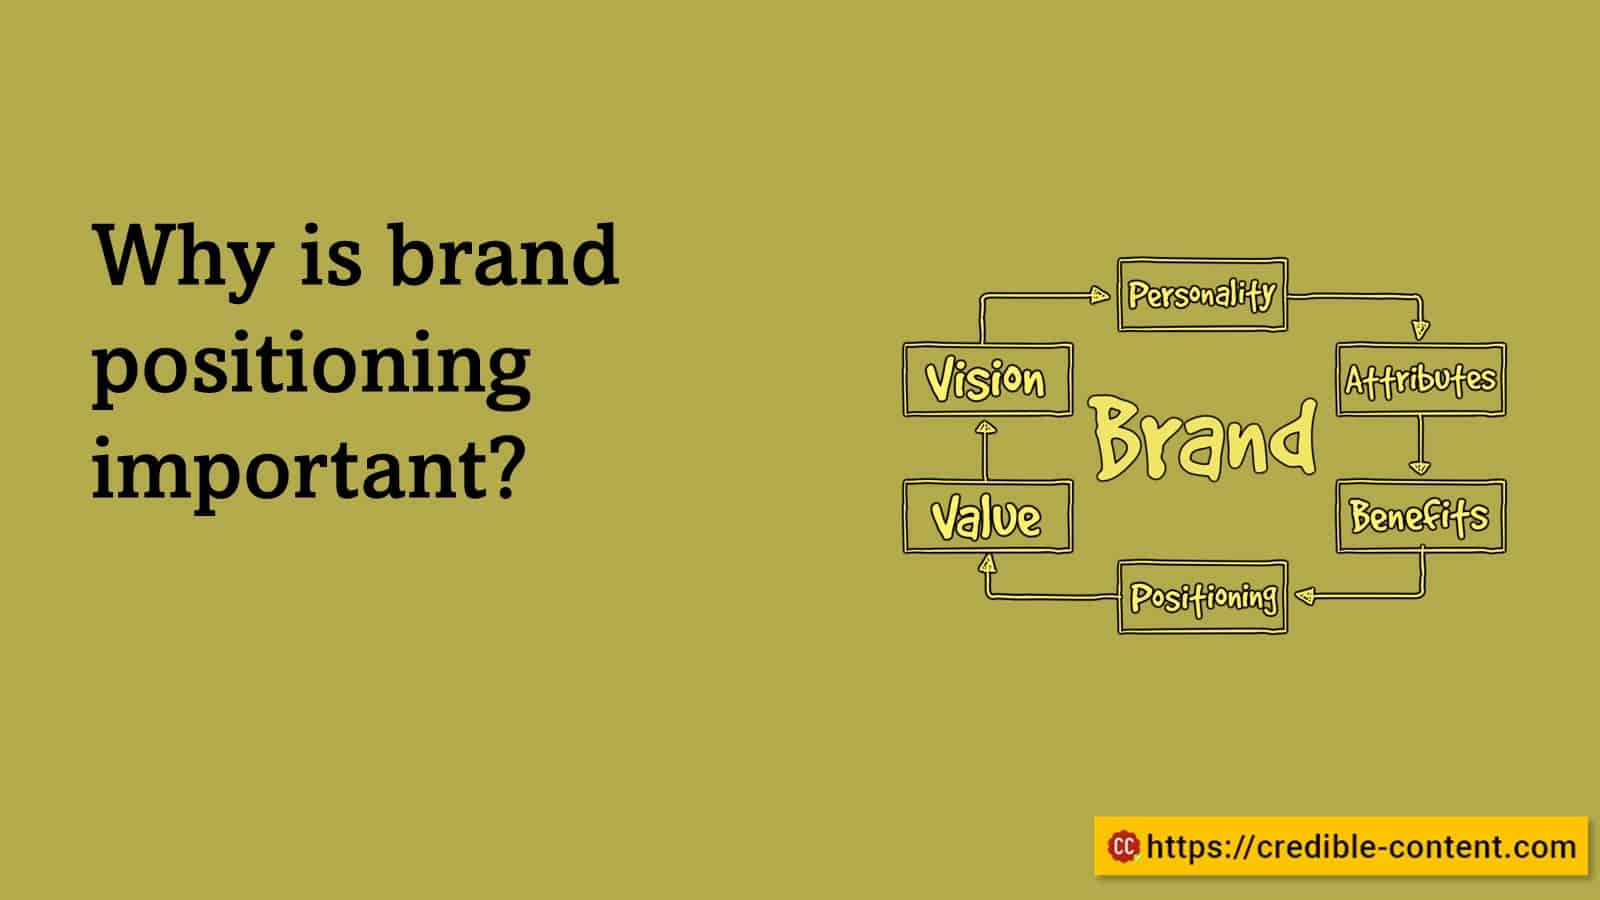 Why is brand positioning important